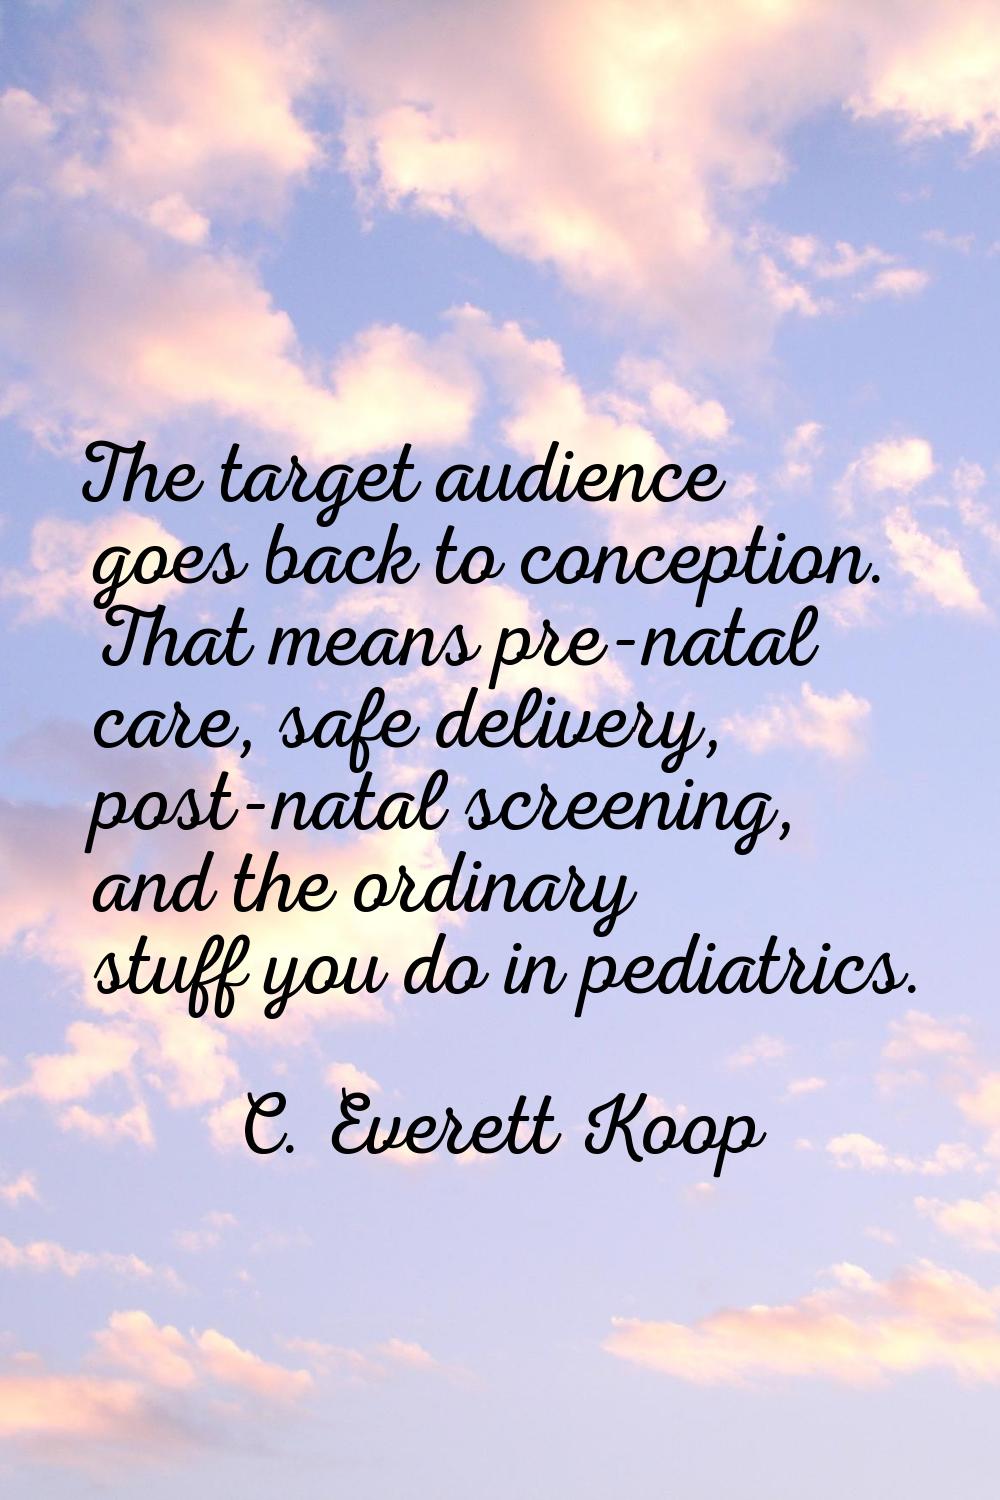 The target audience goes back to conception. That means pre-natal care, safe delivery, post-natal s